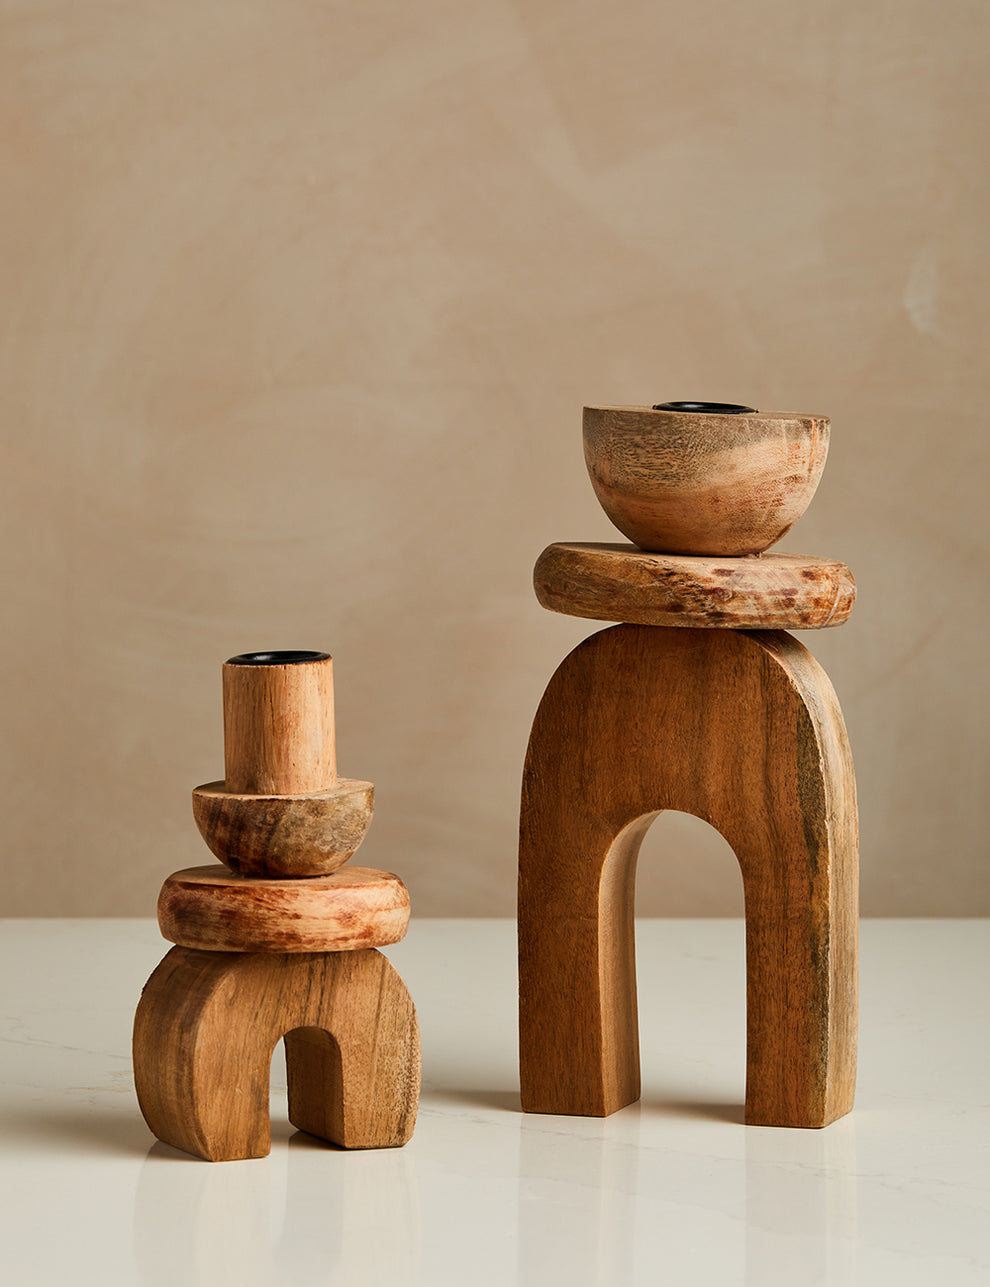 Set of Two Wooden Candle Holders